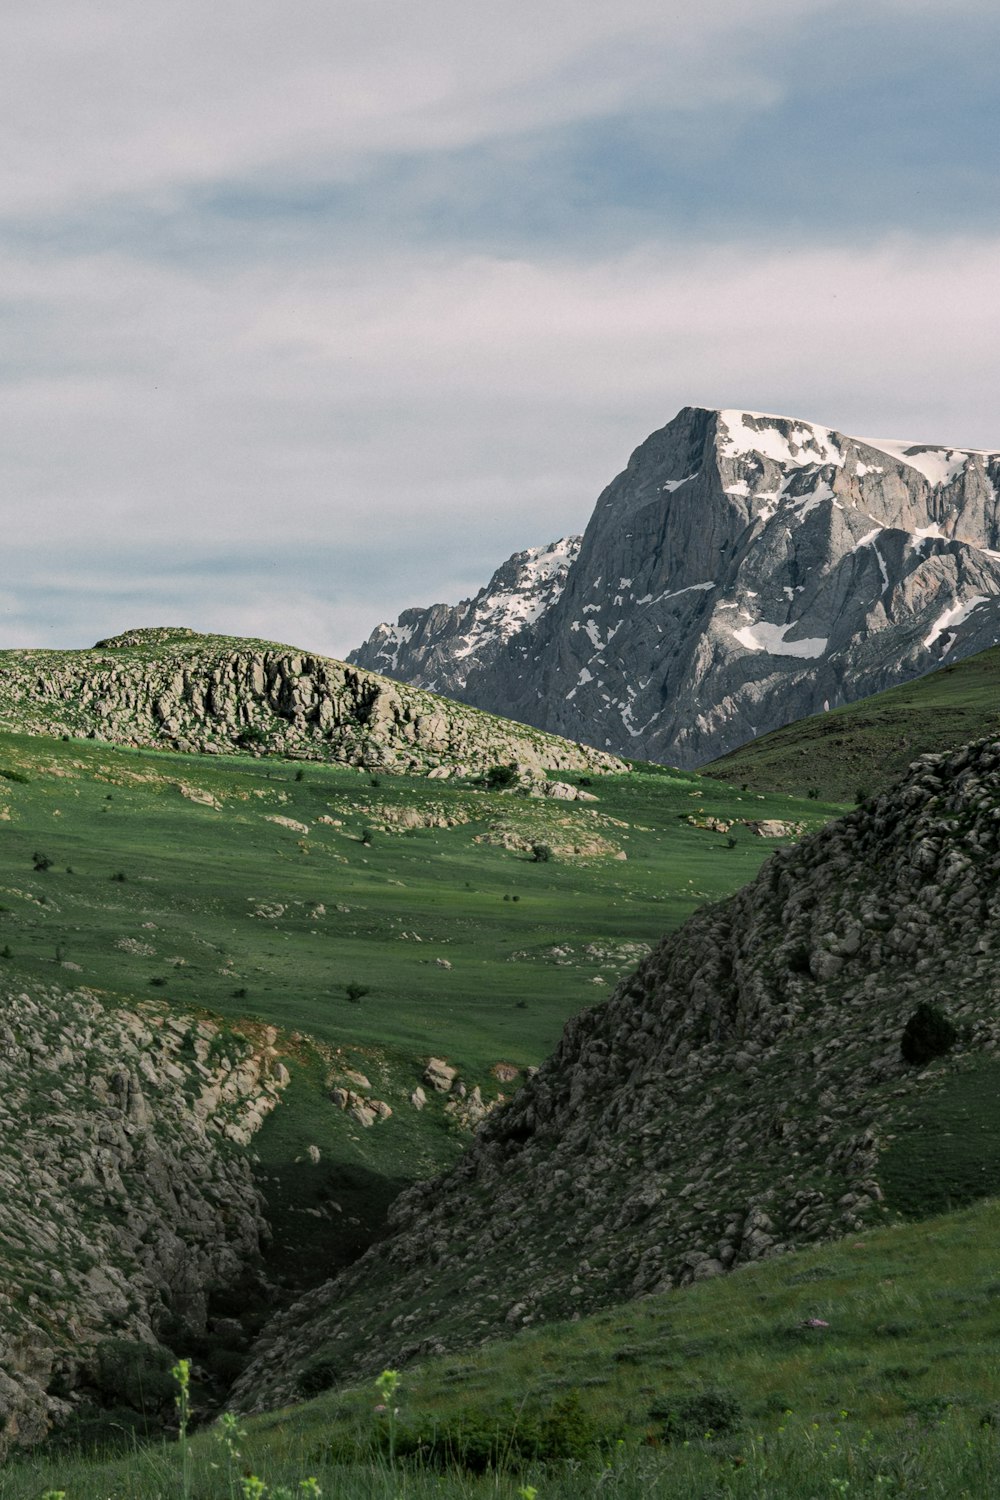 a mountain range with a horse grazing in the foreground